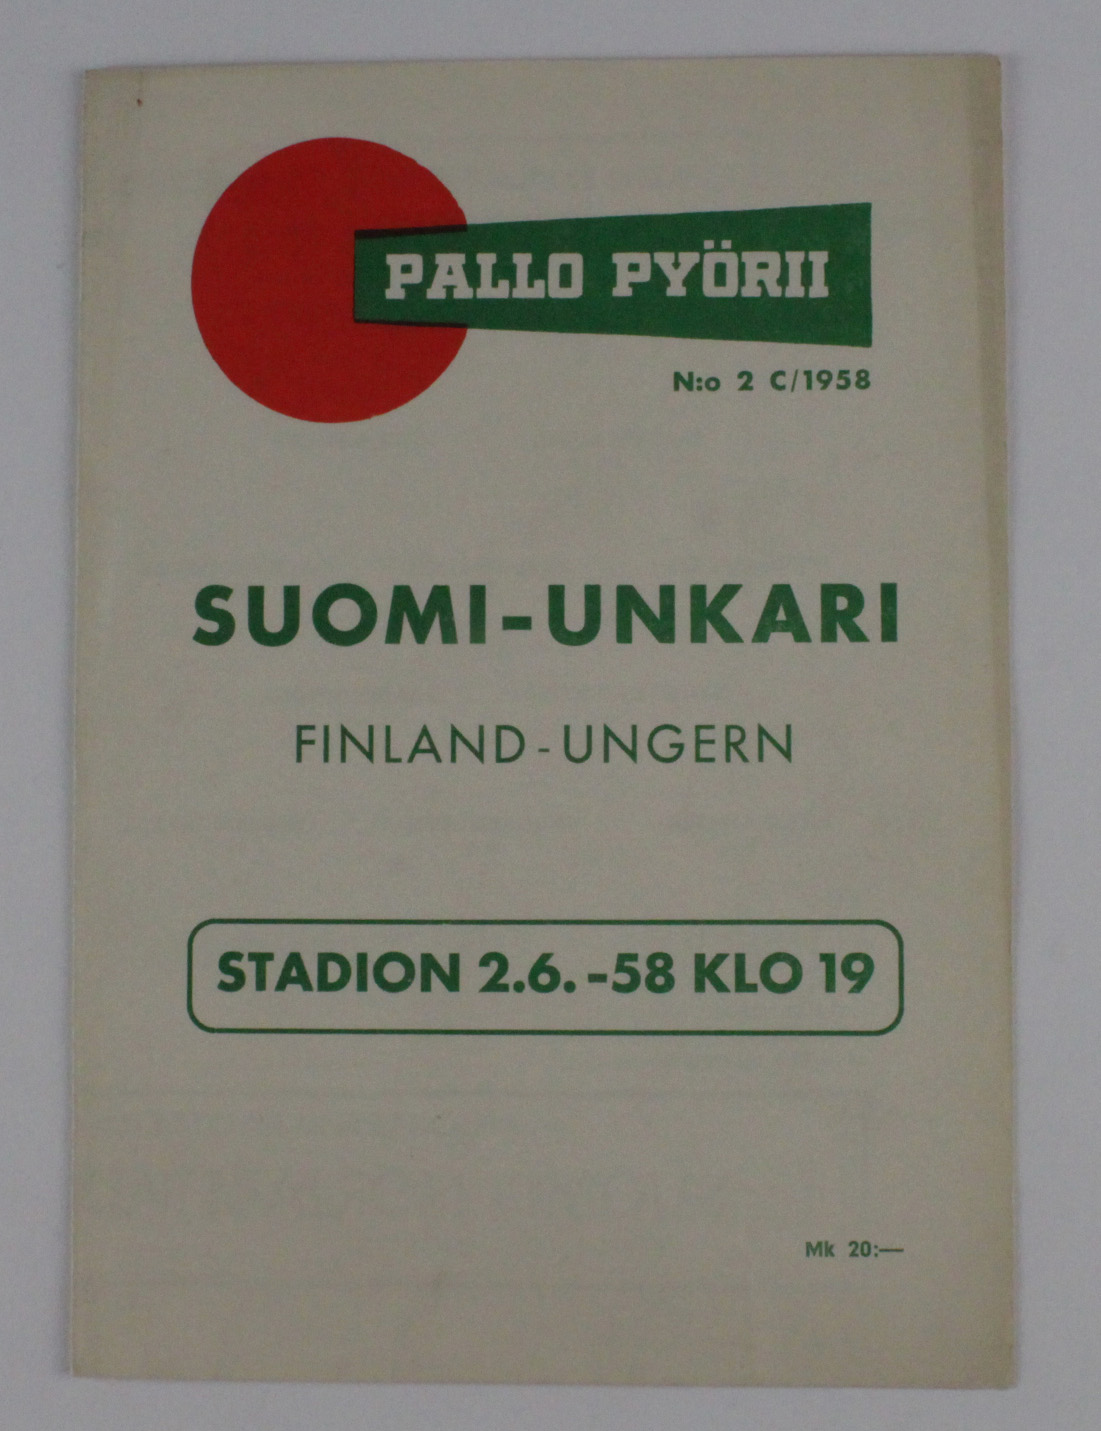 Finland v Hungary International played Helsinki 2/6/1958. A warm up match for the world cup.